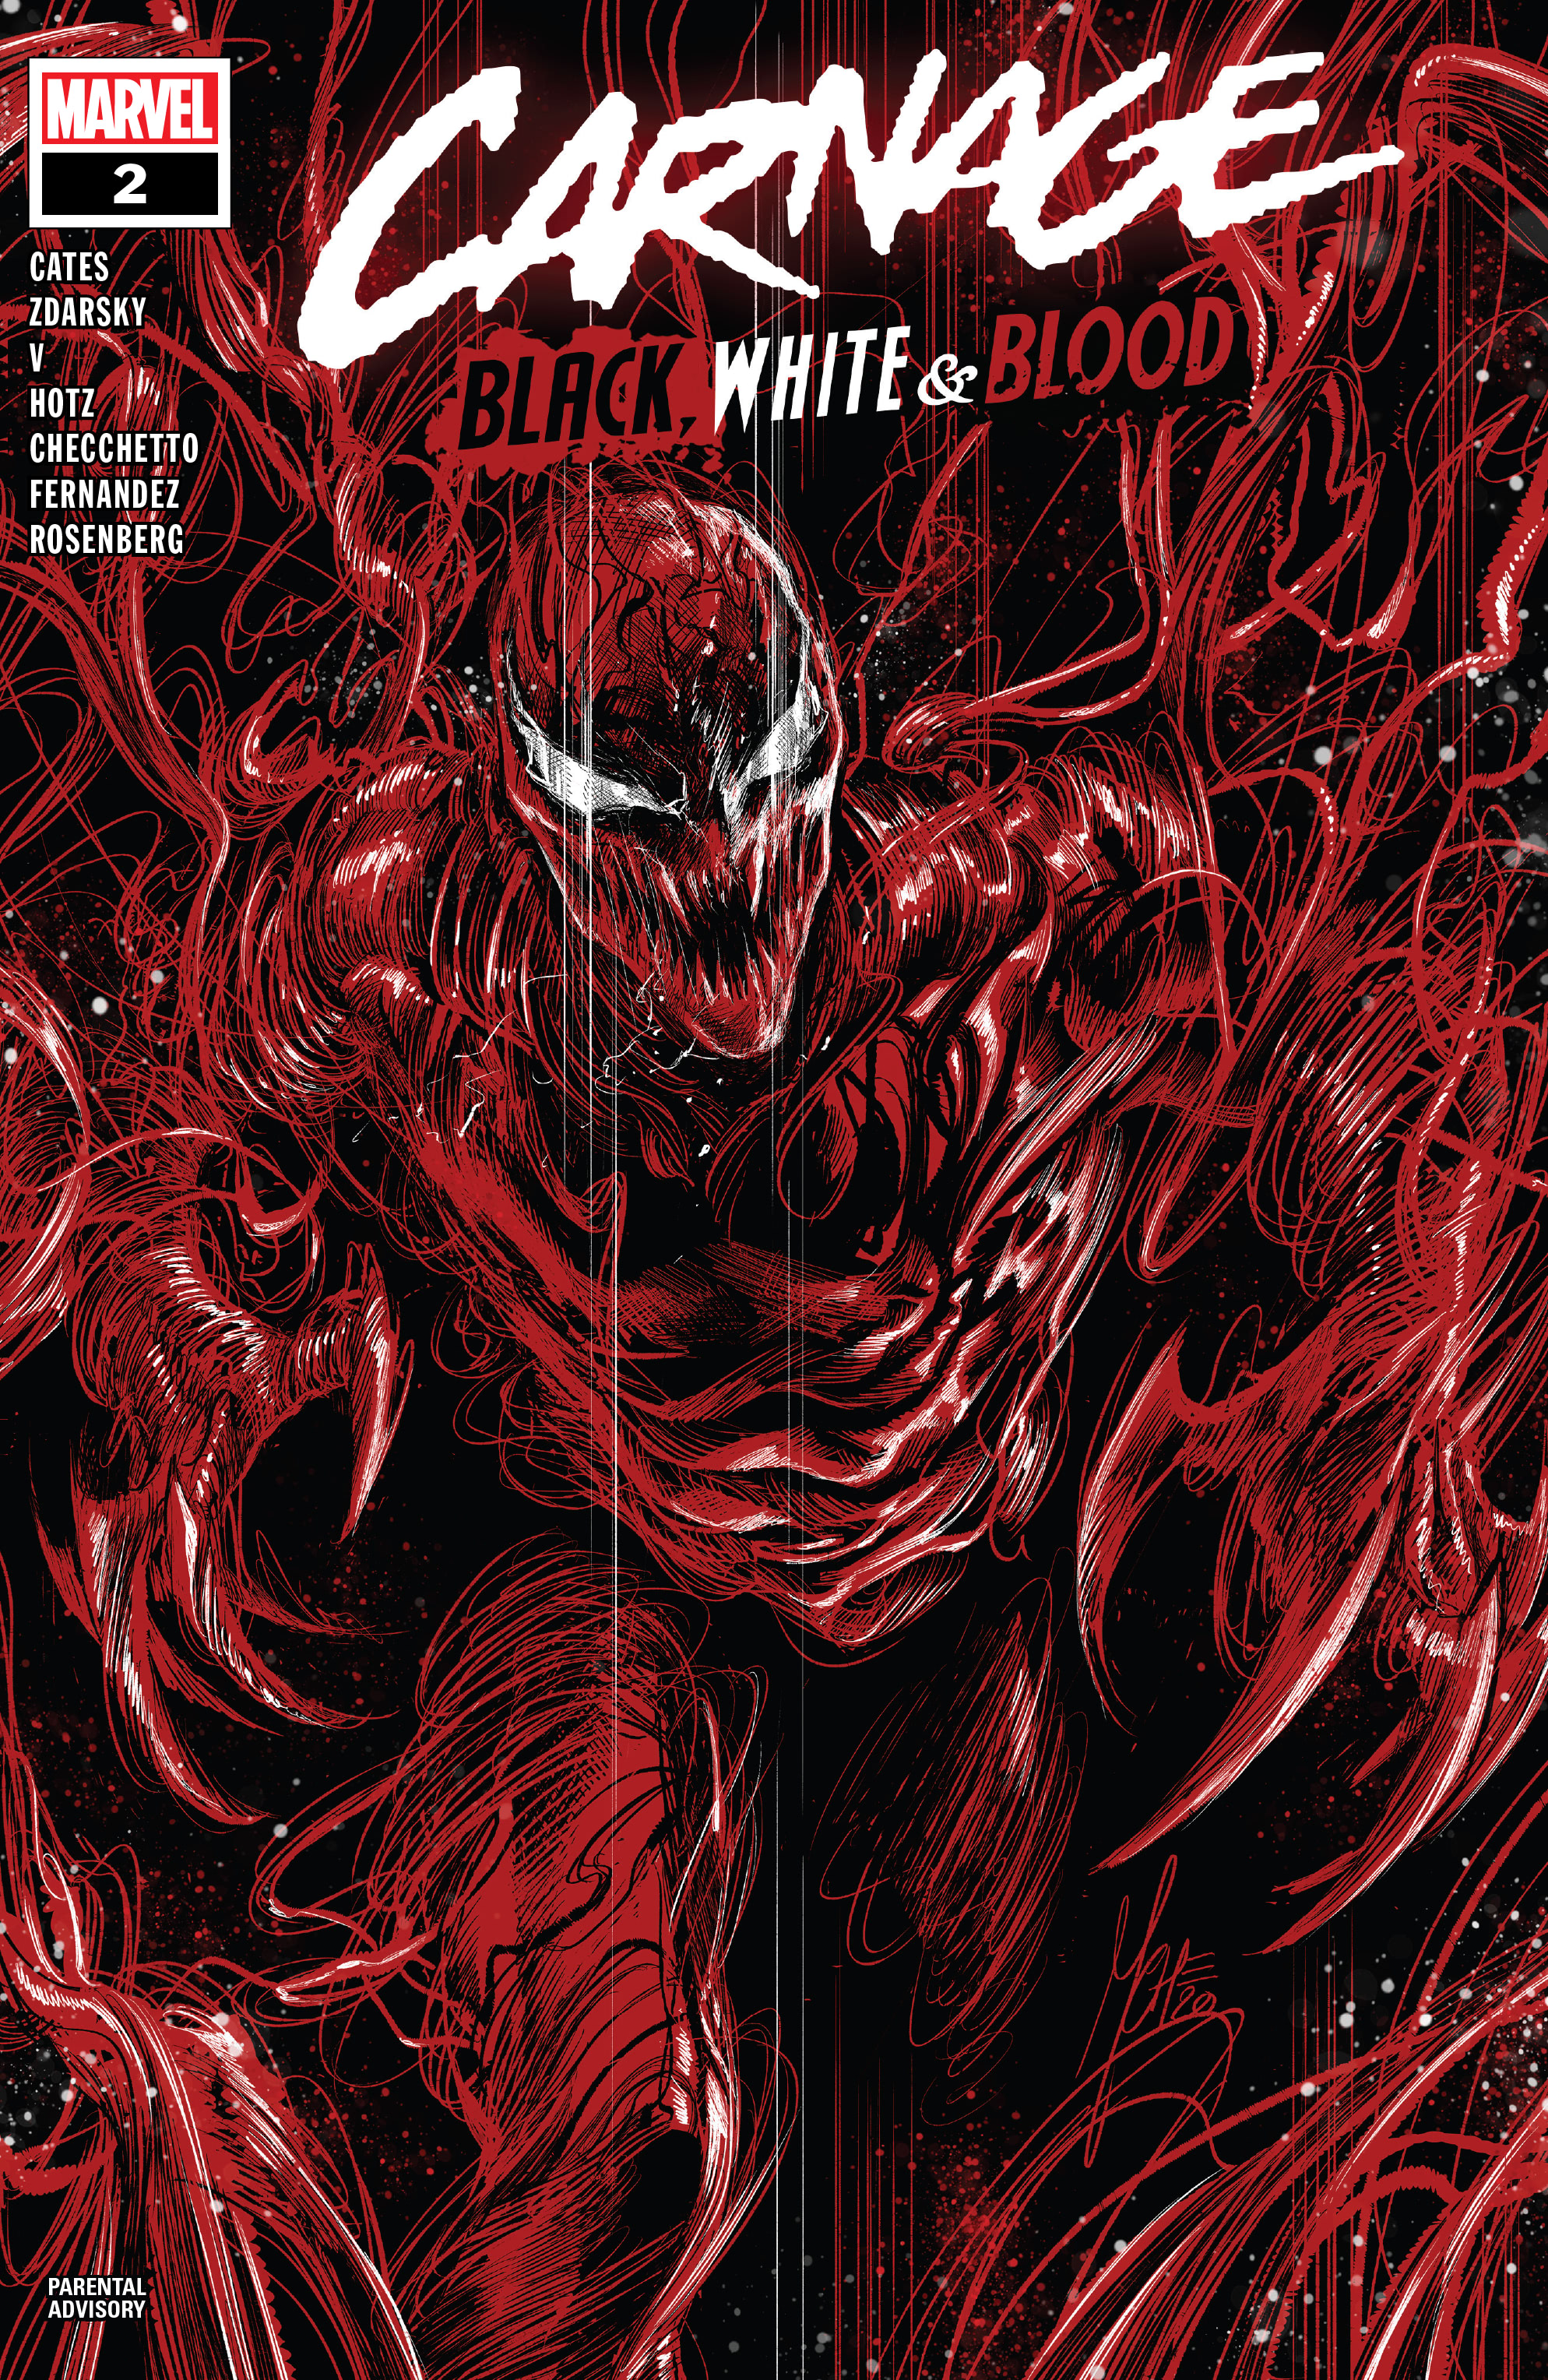 Carnage: Black, White & Blood (2021): Chapter 2 - Page 1